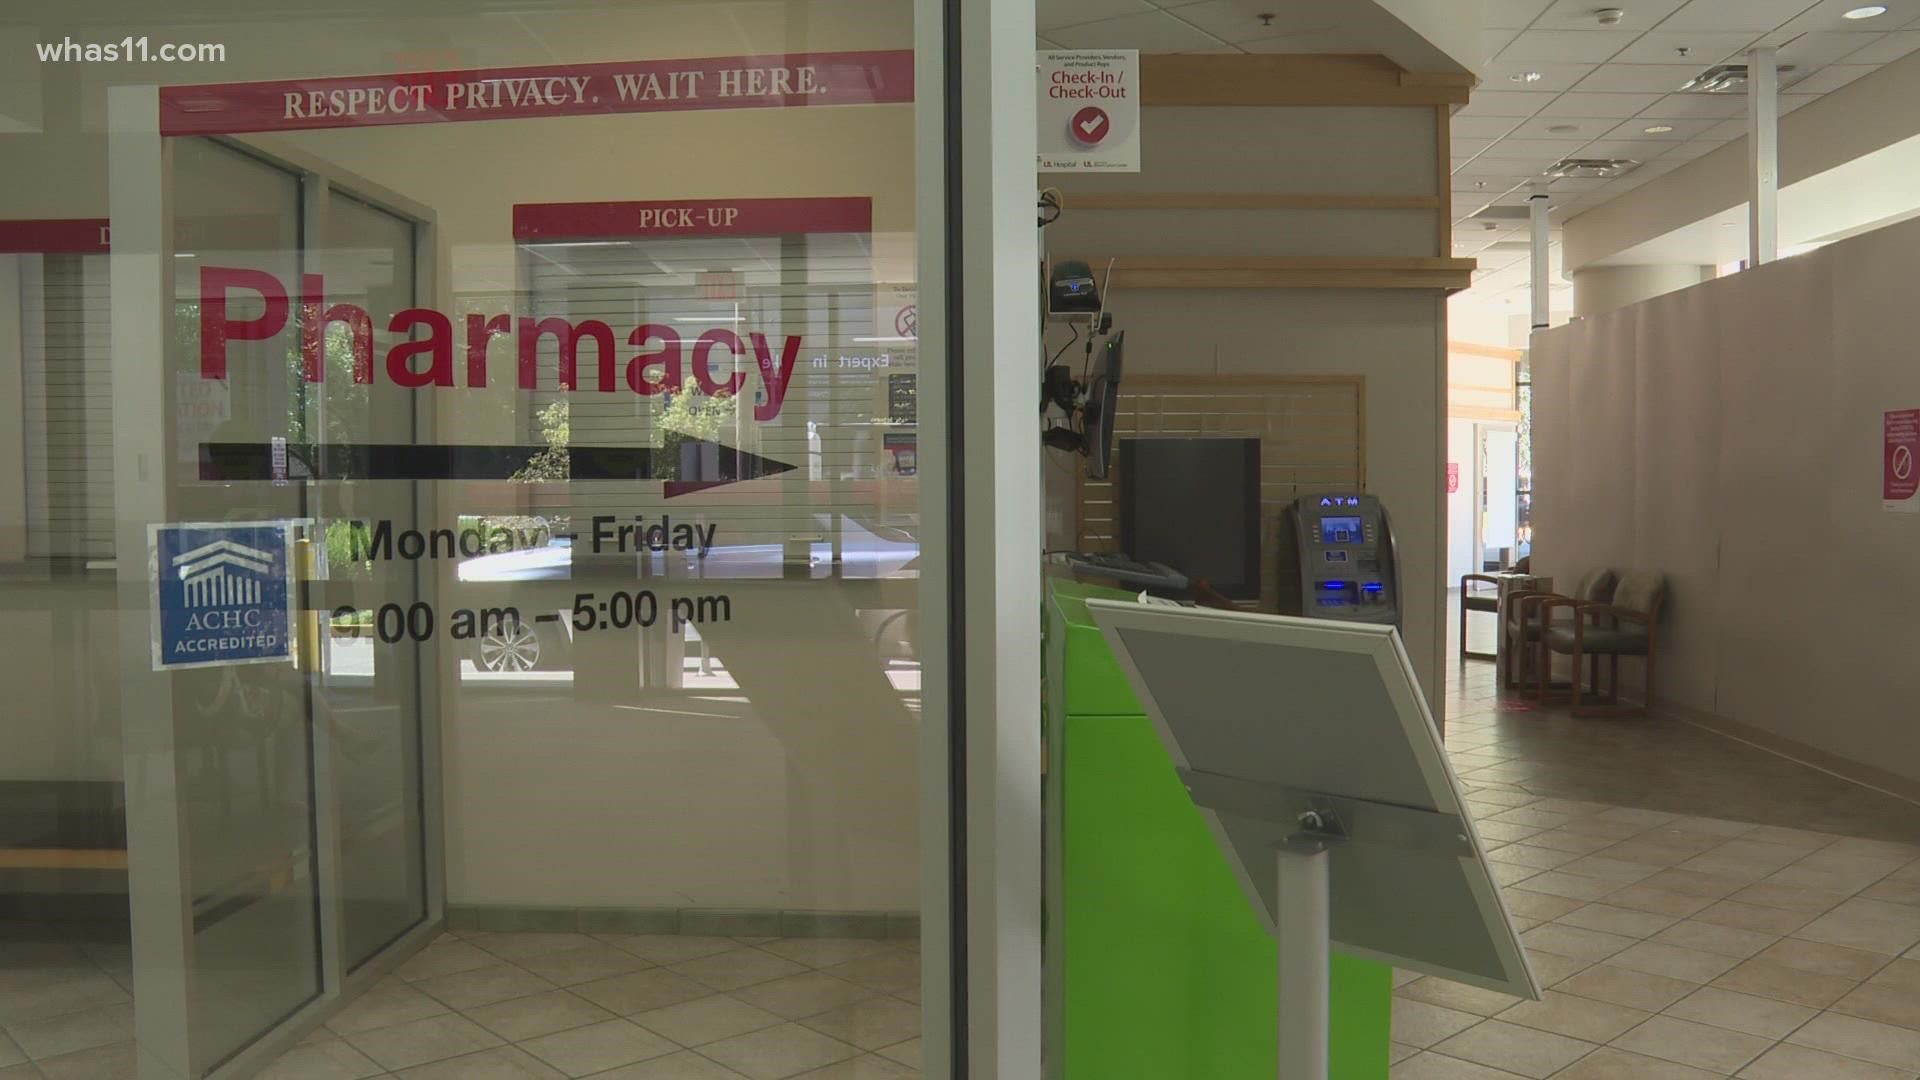 "Chained pharmacies are having to adjust their hours based on staff availability."